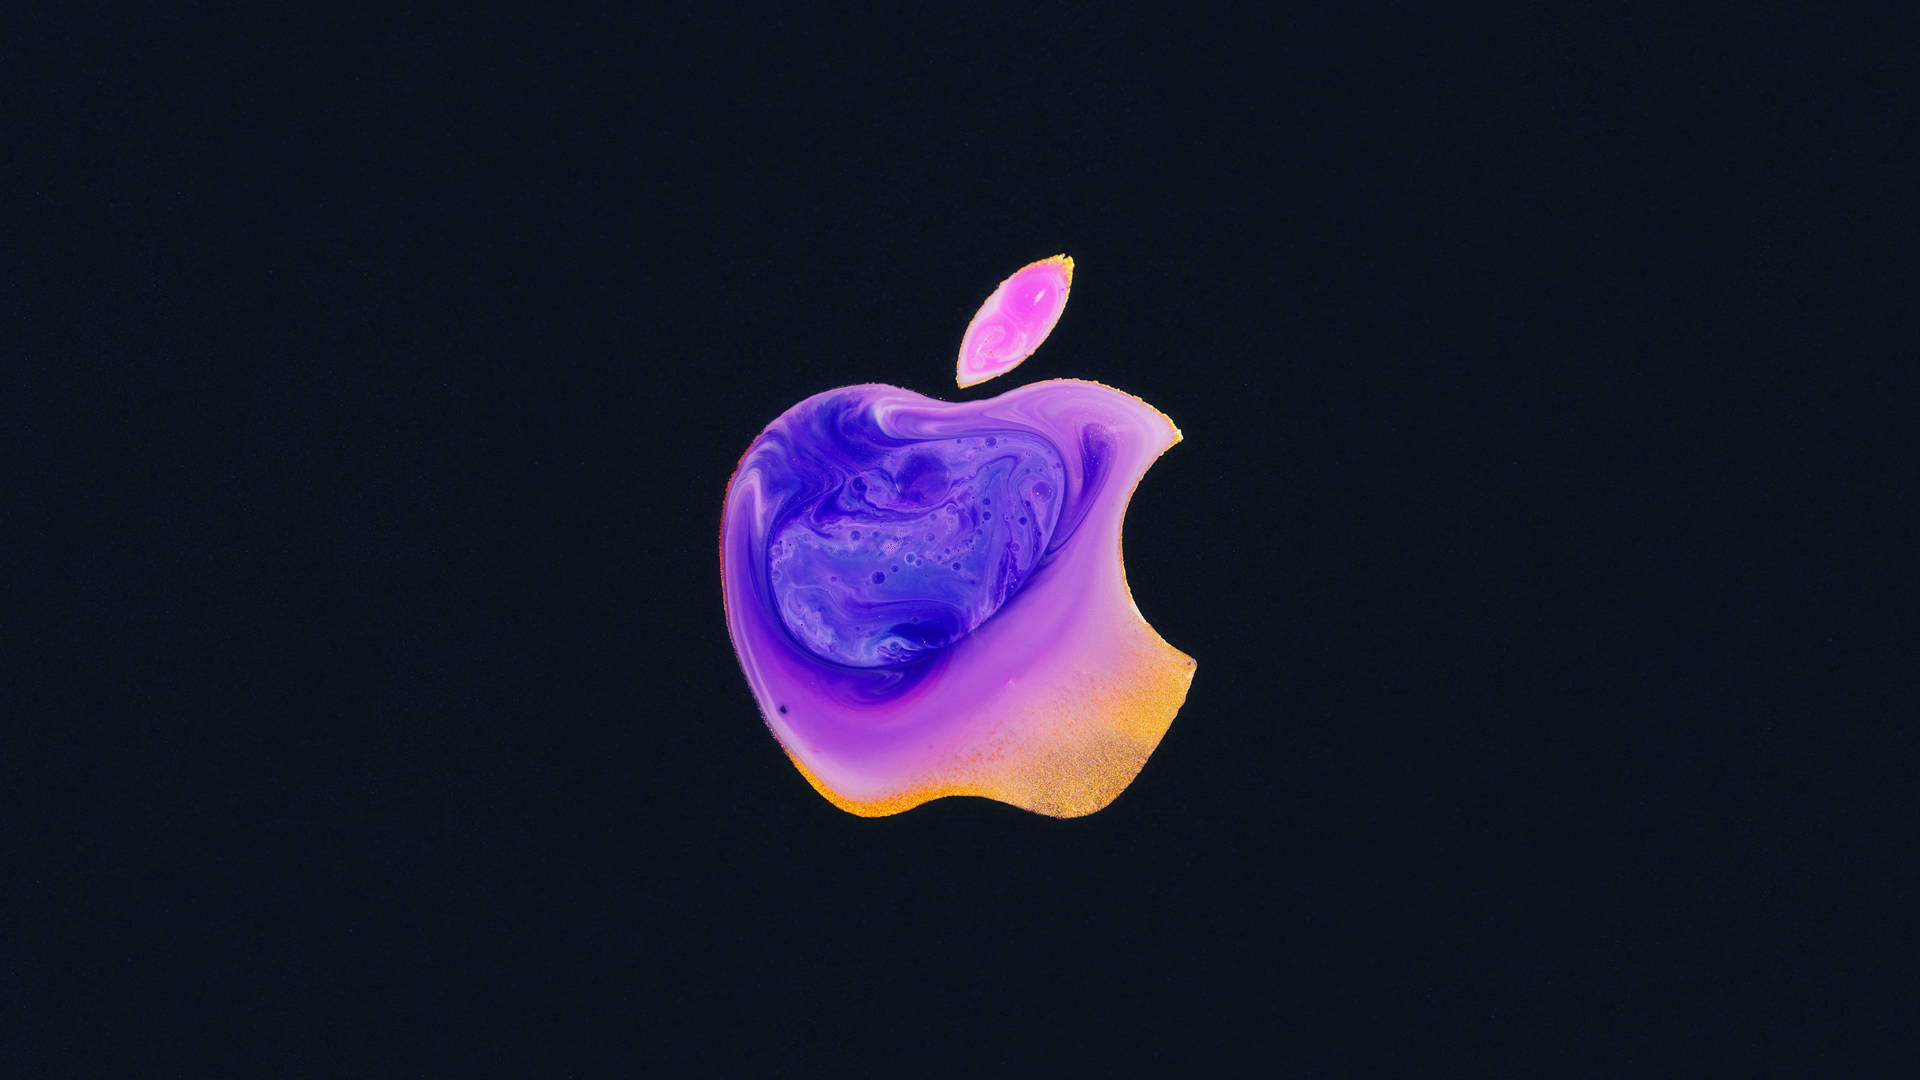 Full Hd Apple With Marble Design Background